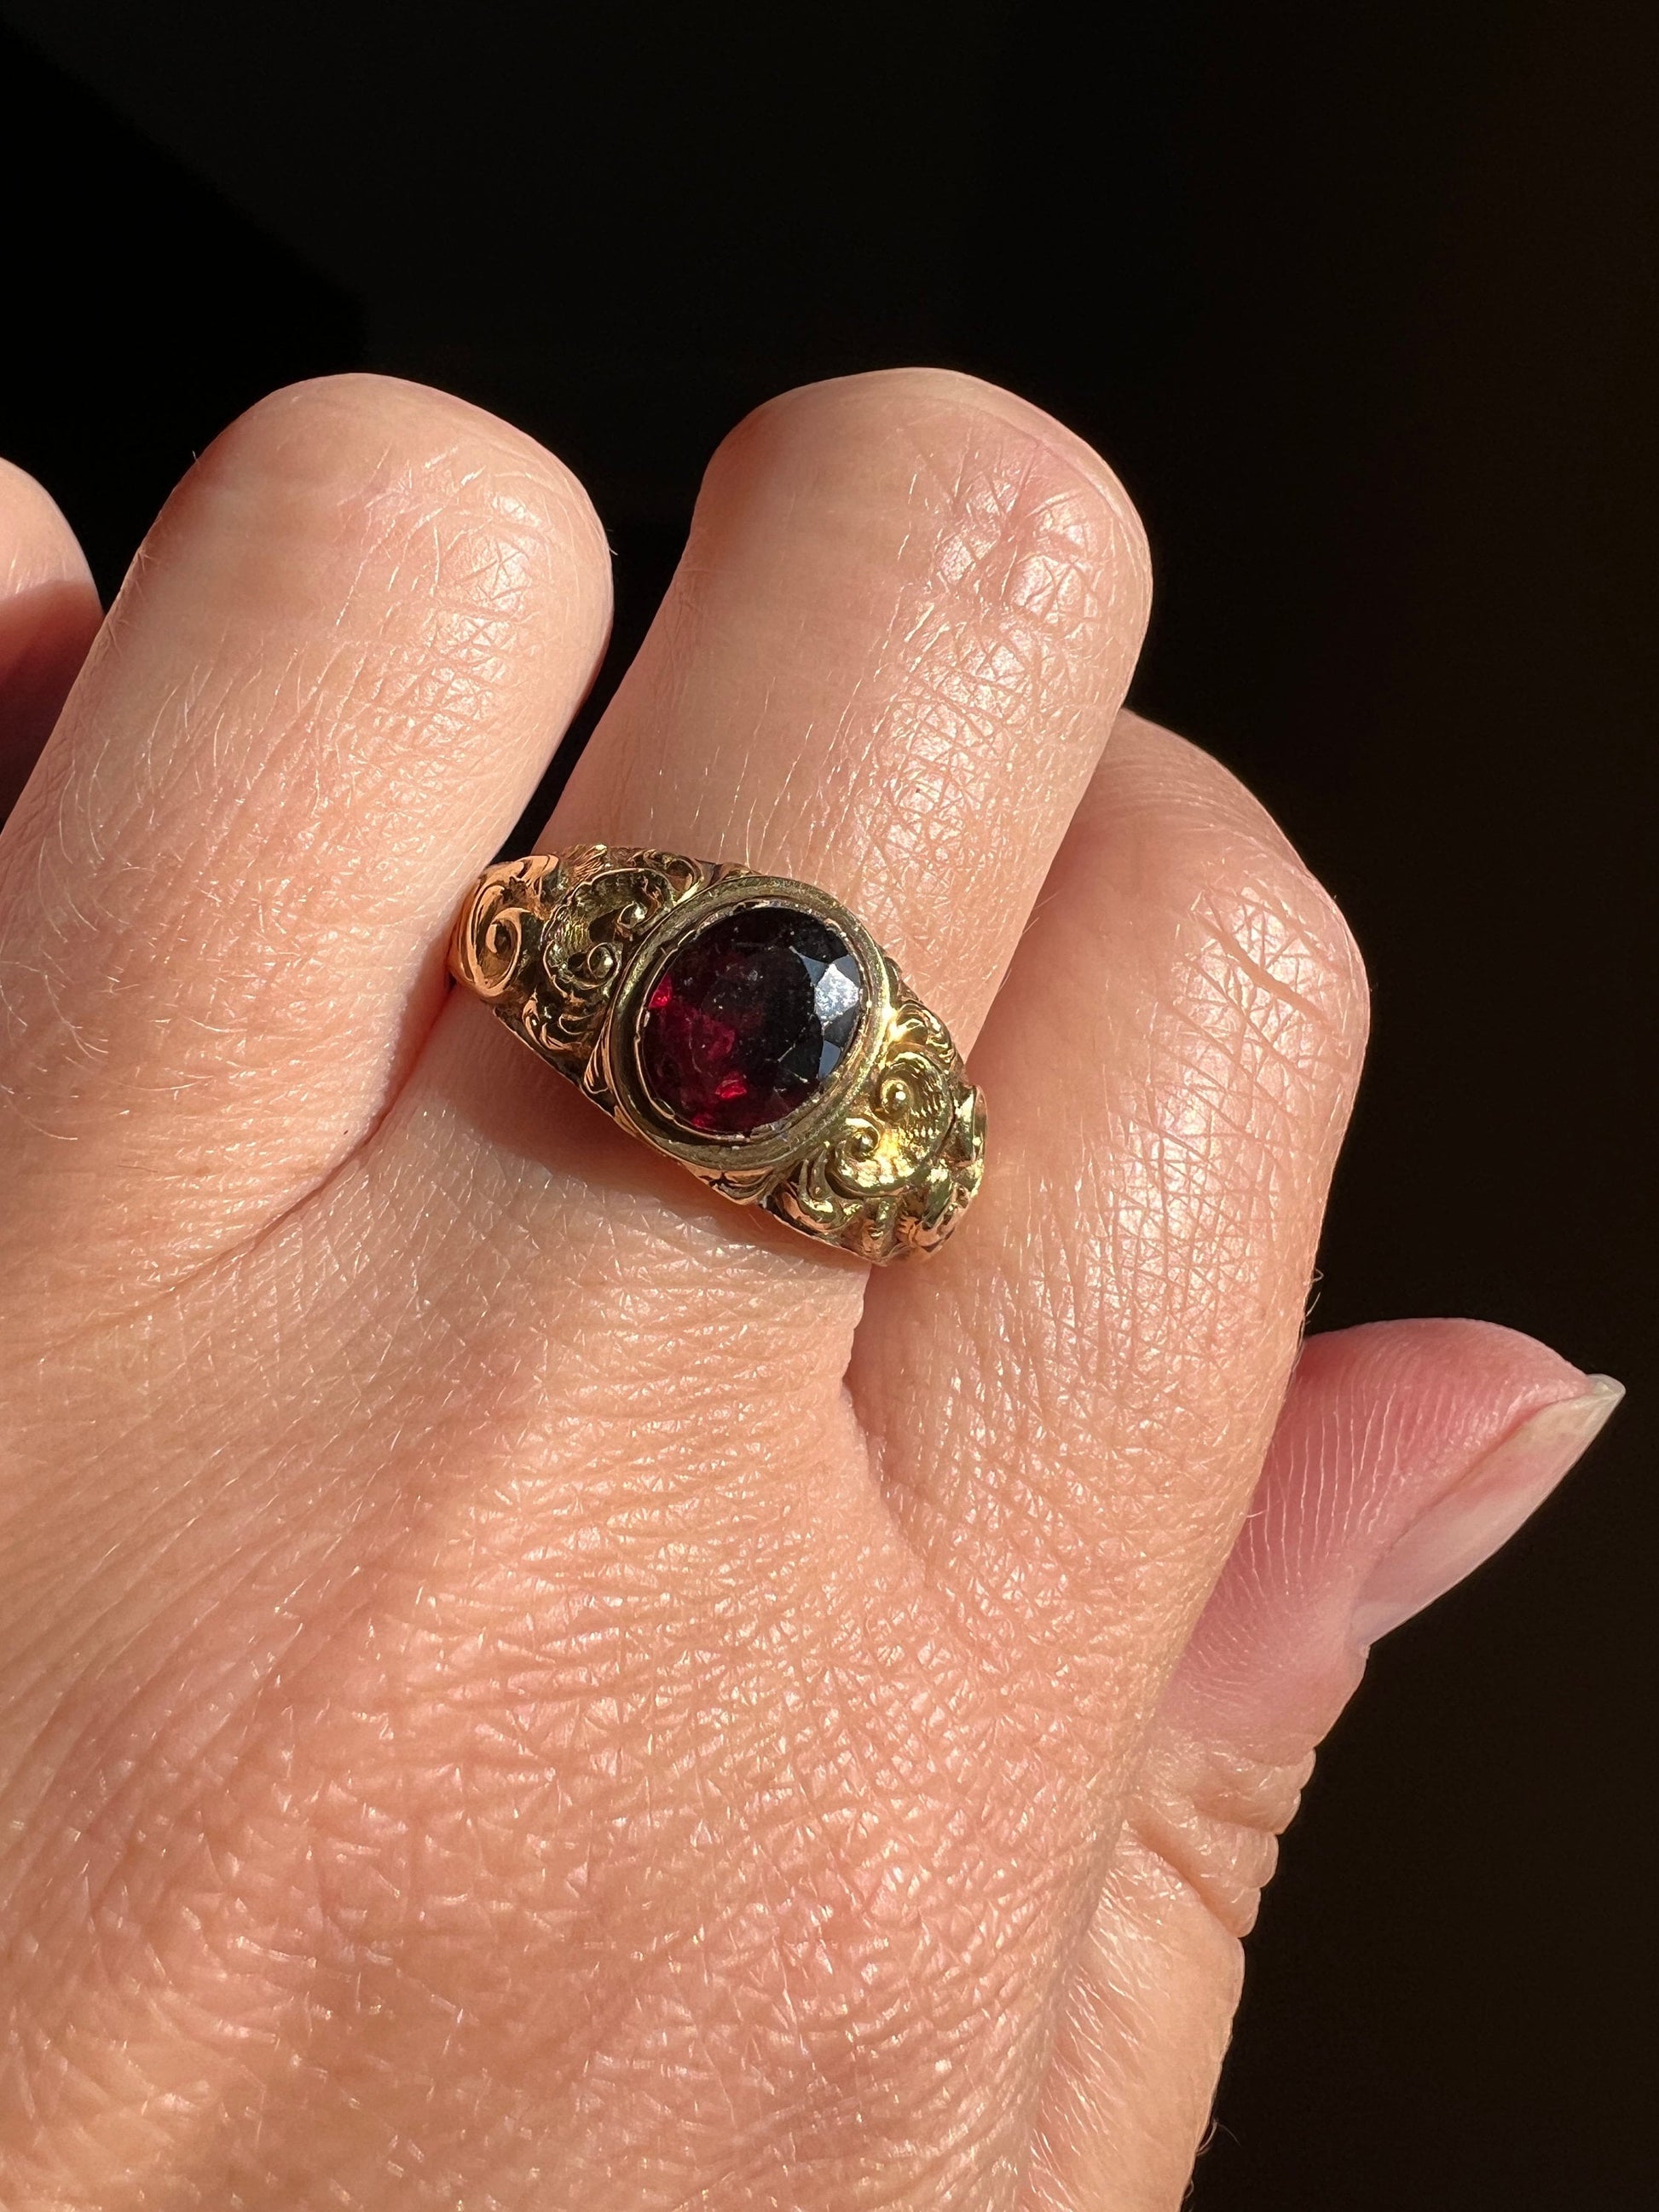 ORNATE Red GARNET Deeply Embossed Antique Ring 15k Gold Victorian Stacker Romantic Gift Shell Swirl Band Georgian Collet Set Oval Not 14k